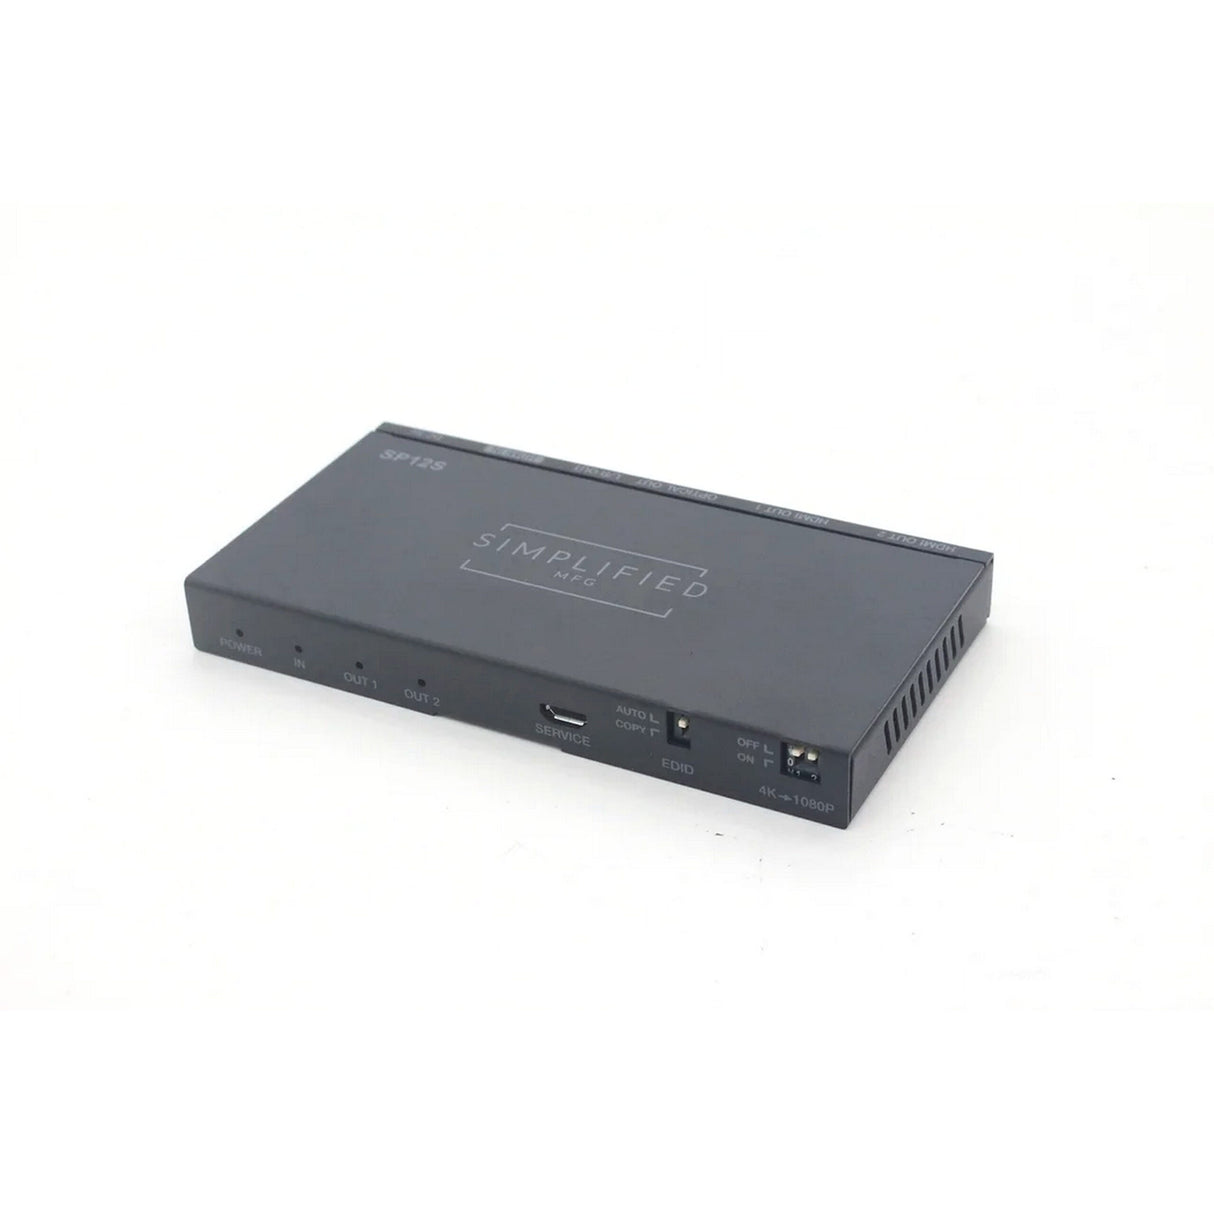 Simplified MFG SP12S HDMI 18Gbps 1 x 2 HDMI Splitter with Scaling